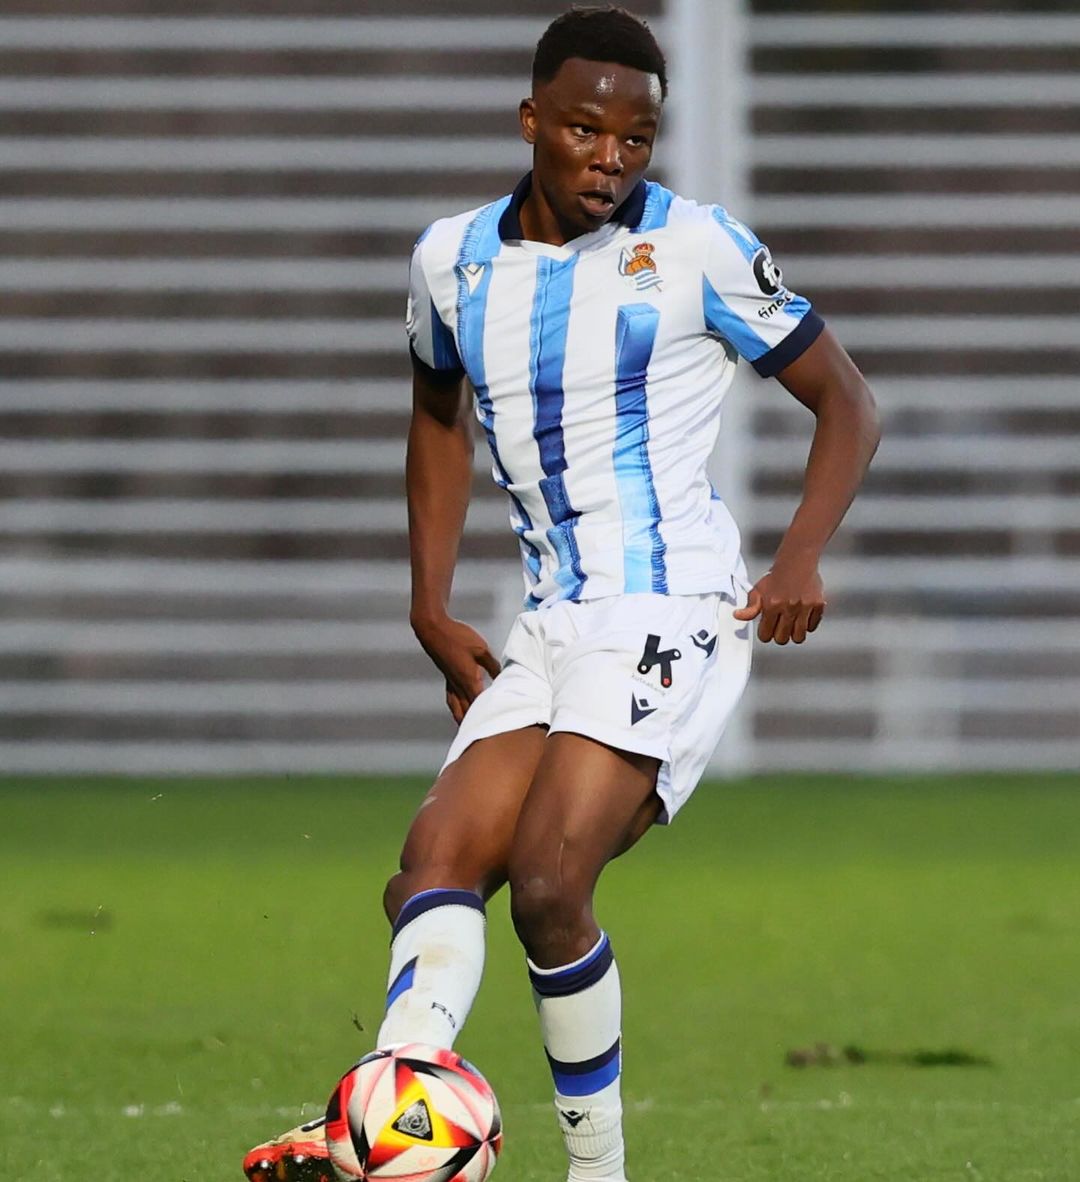 #StarsAbroad Kenyan youngster Job Ochieng was introduced for Real Sociedad B in the 68th minute in the Spanish Primera RFEF Group 1 league match on Saturday. The 21 year old featured in the game against Sestao whom defeated the home side 2-3. #kenyansoccer #harambeestars